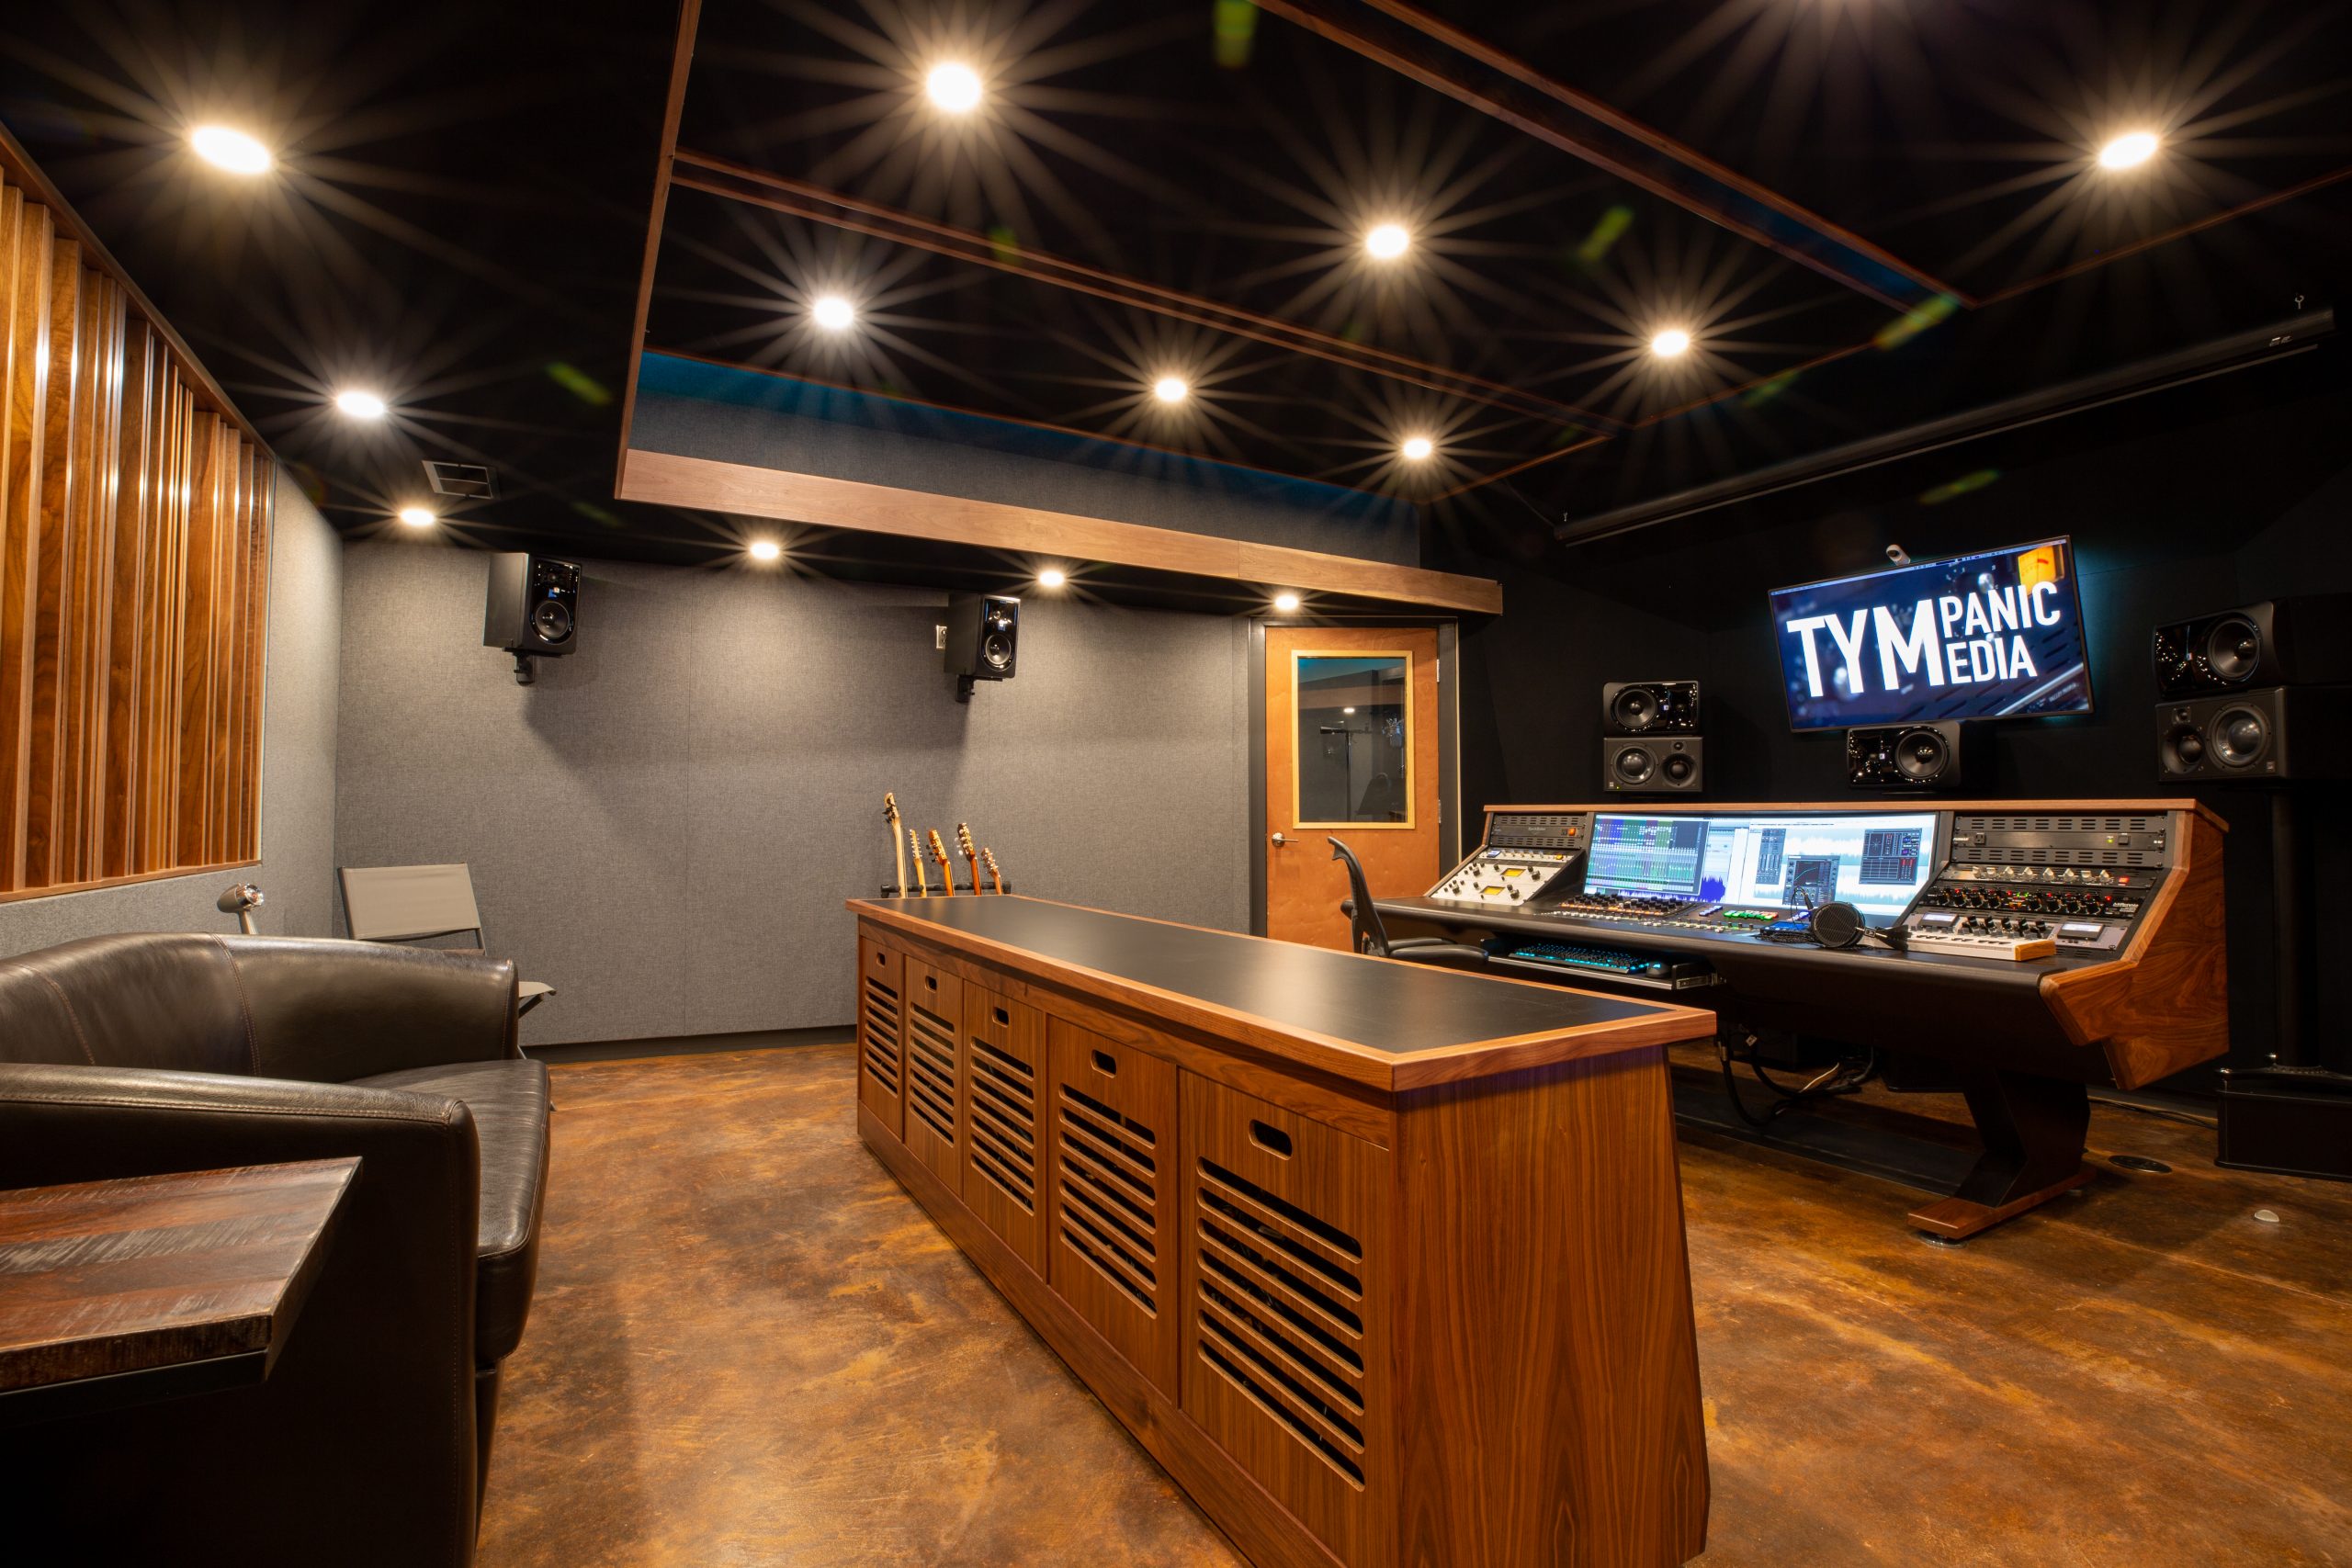 Tympanic Media Control Room from Front